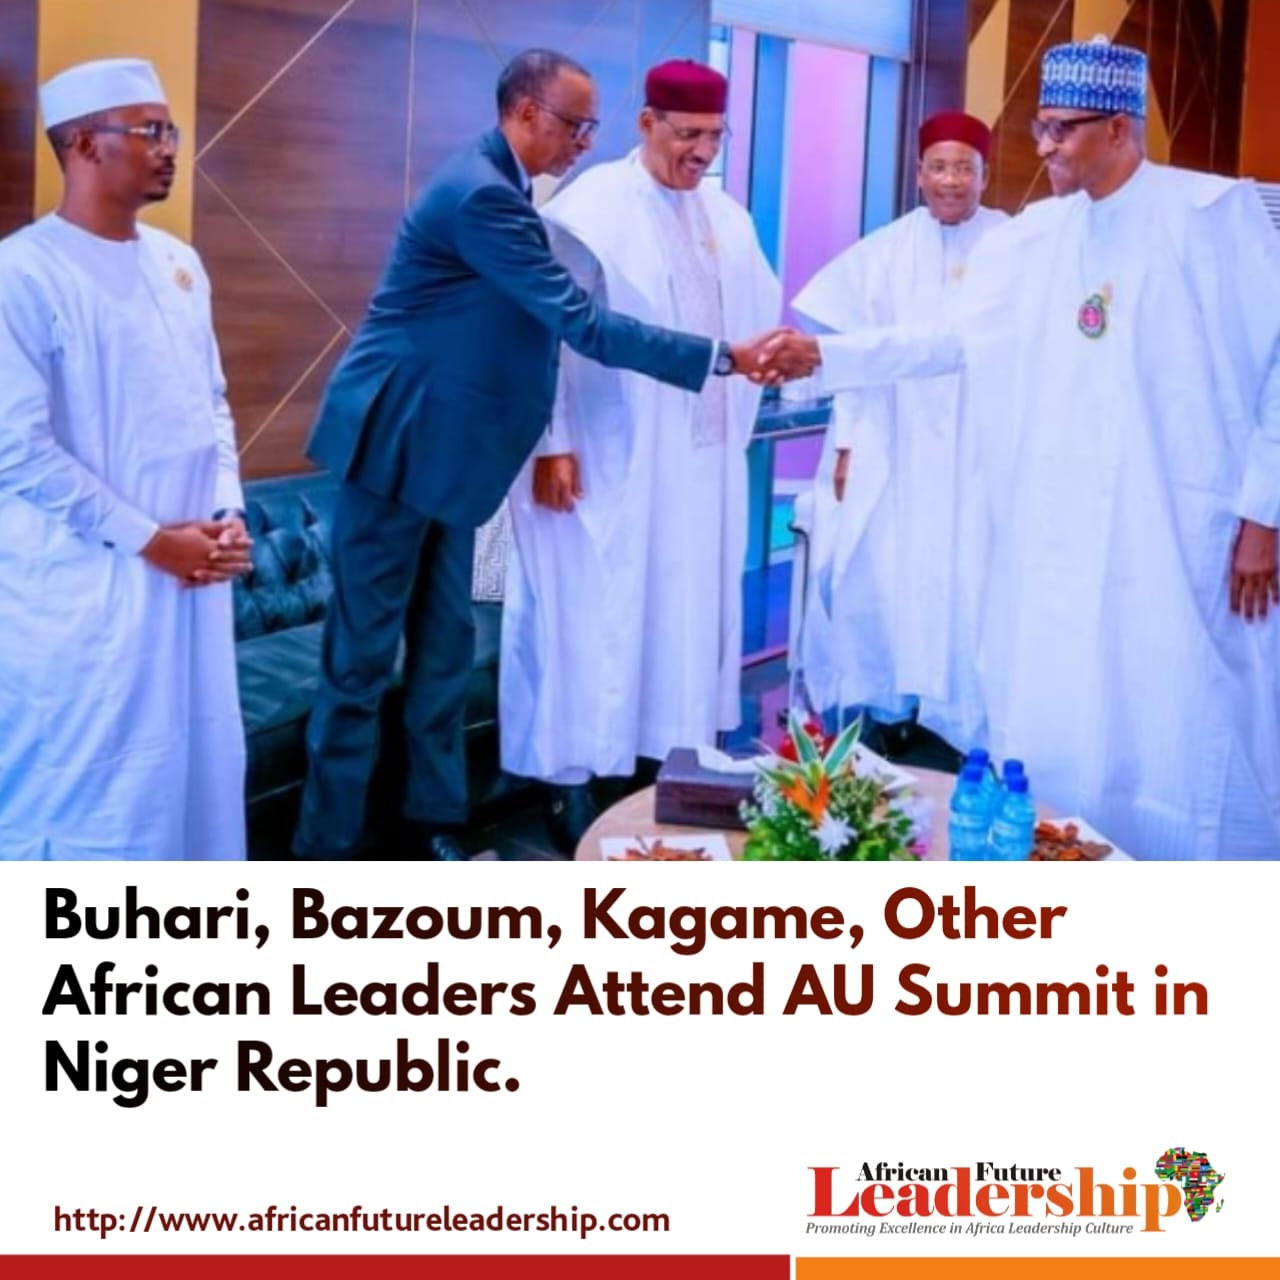 Buhari, Bazoum, Kagame, Other African Leaders Attend AU Summit in Niger Republic